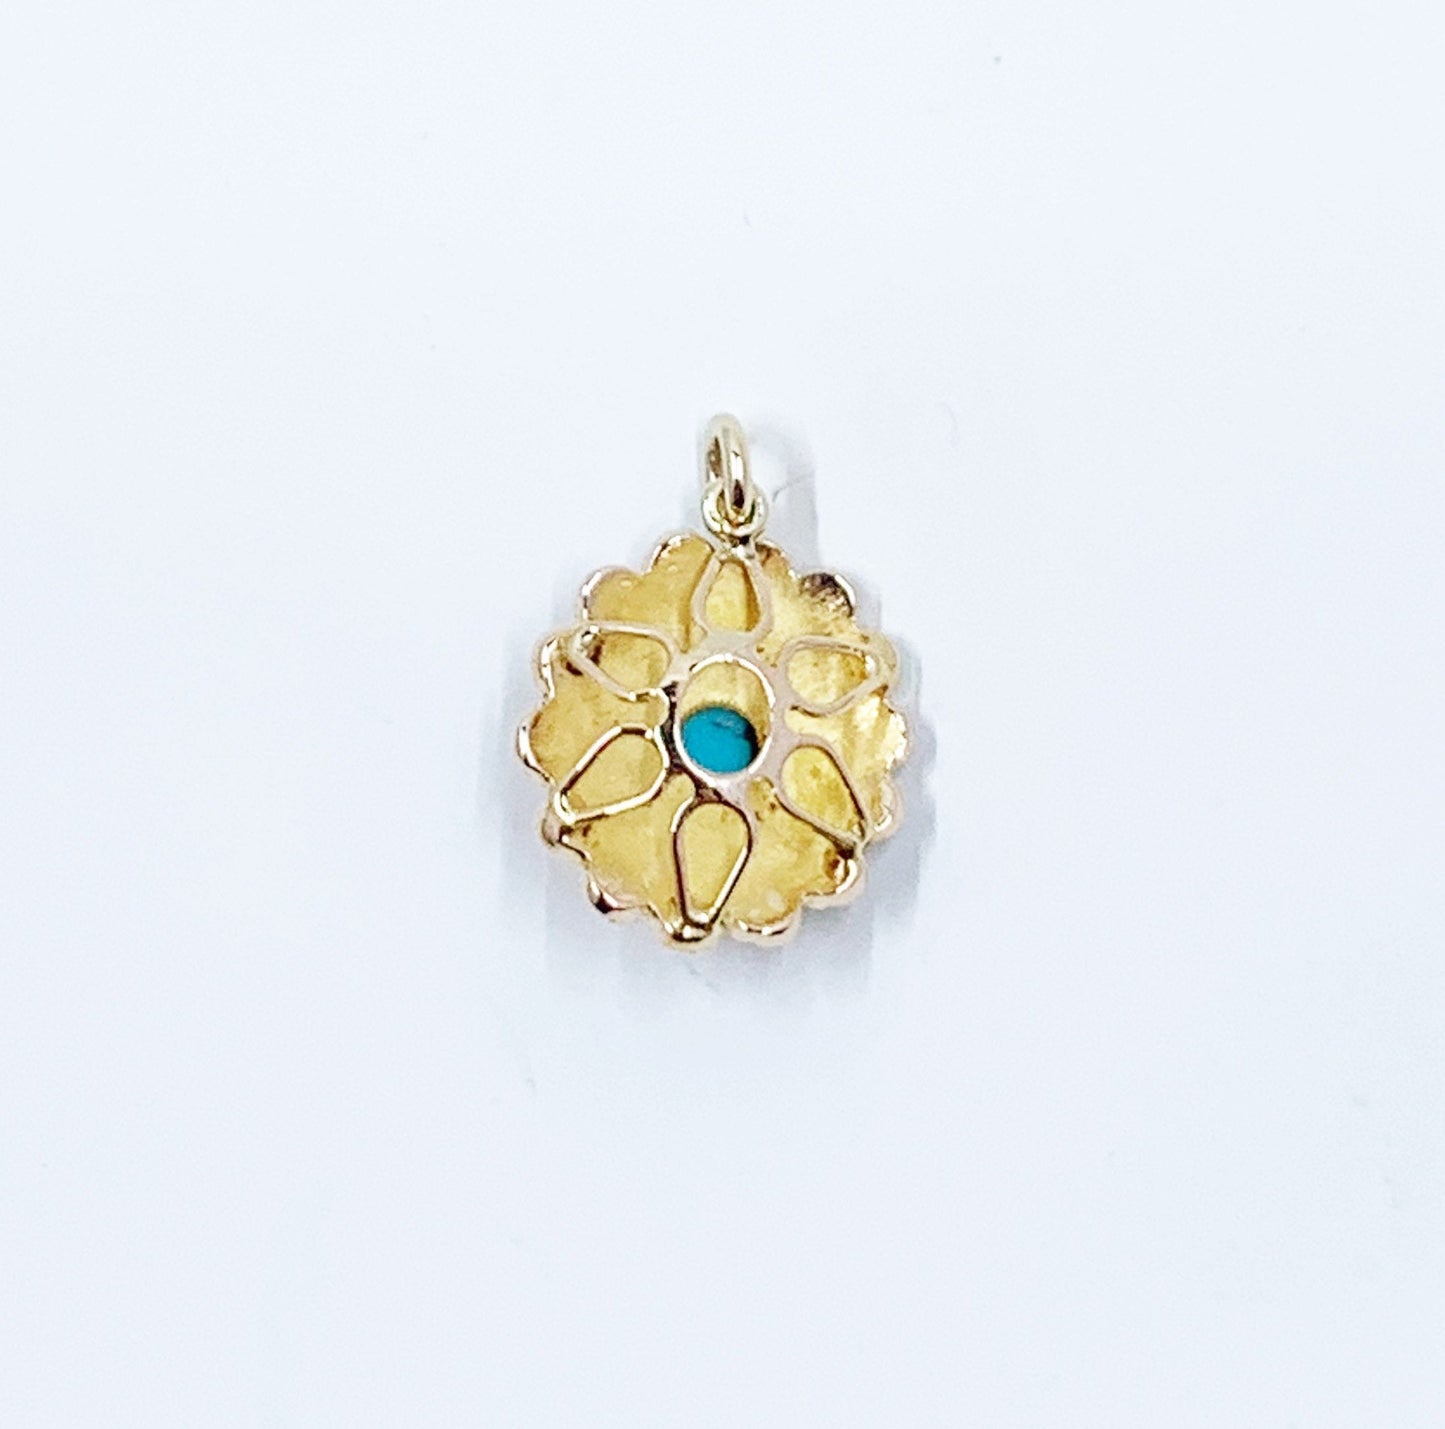 Vintage 14k Gold Turquoise Cluster Pendant | Conversion Jewelry